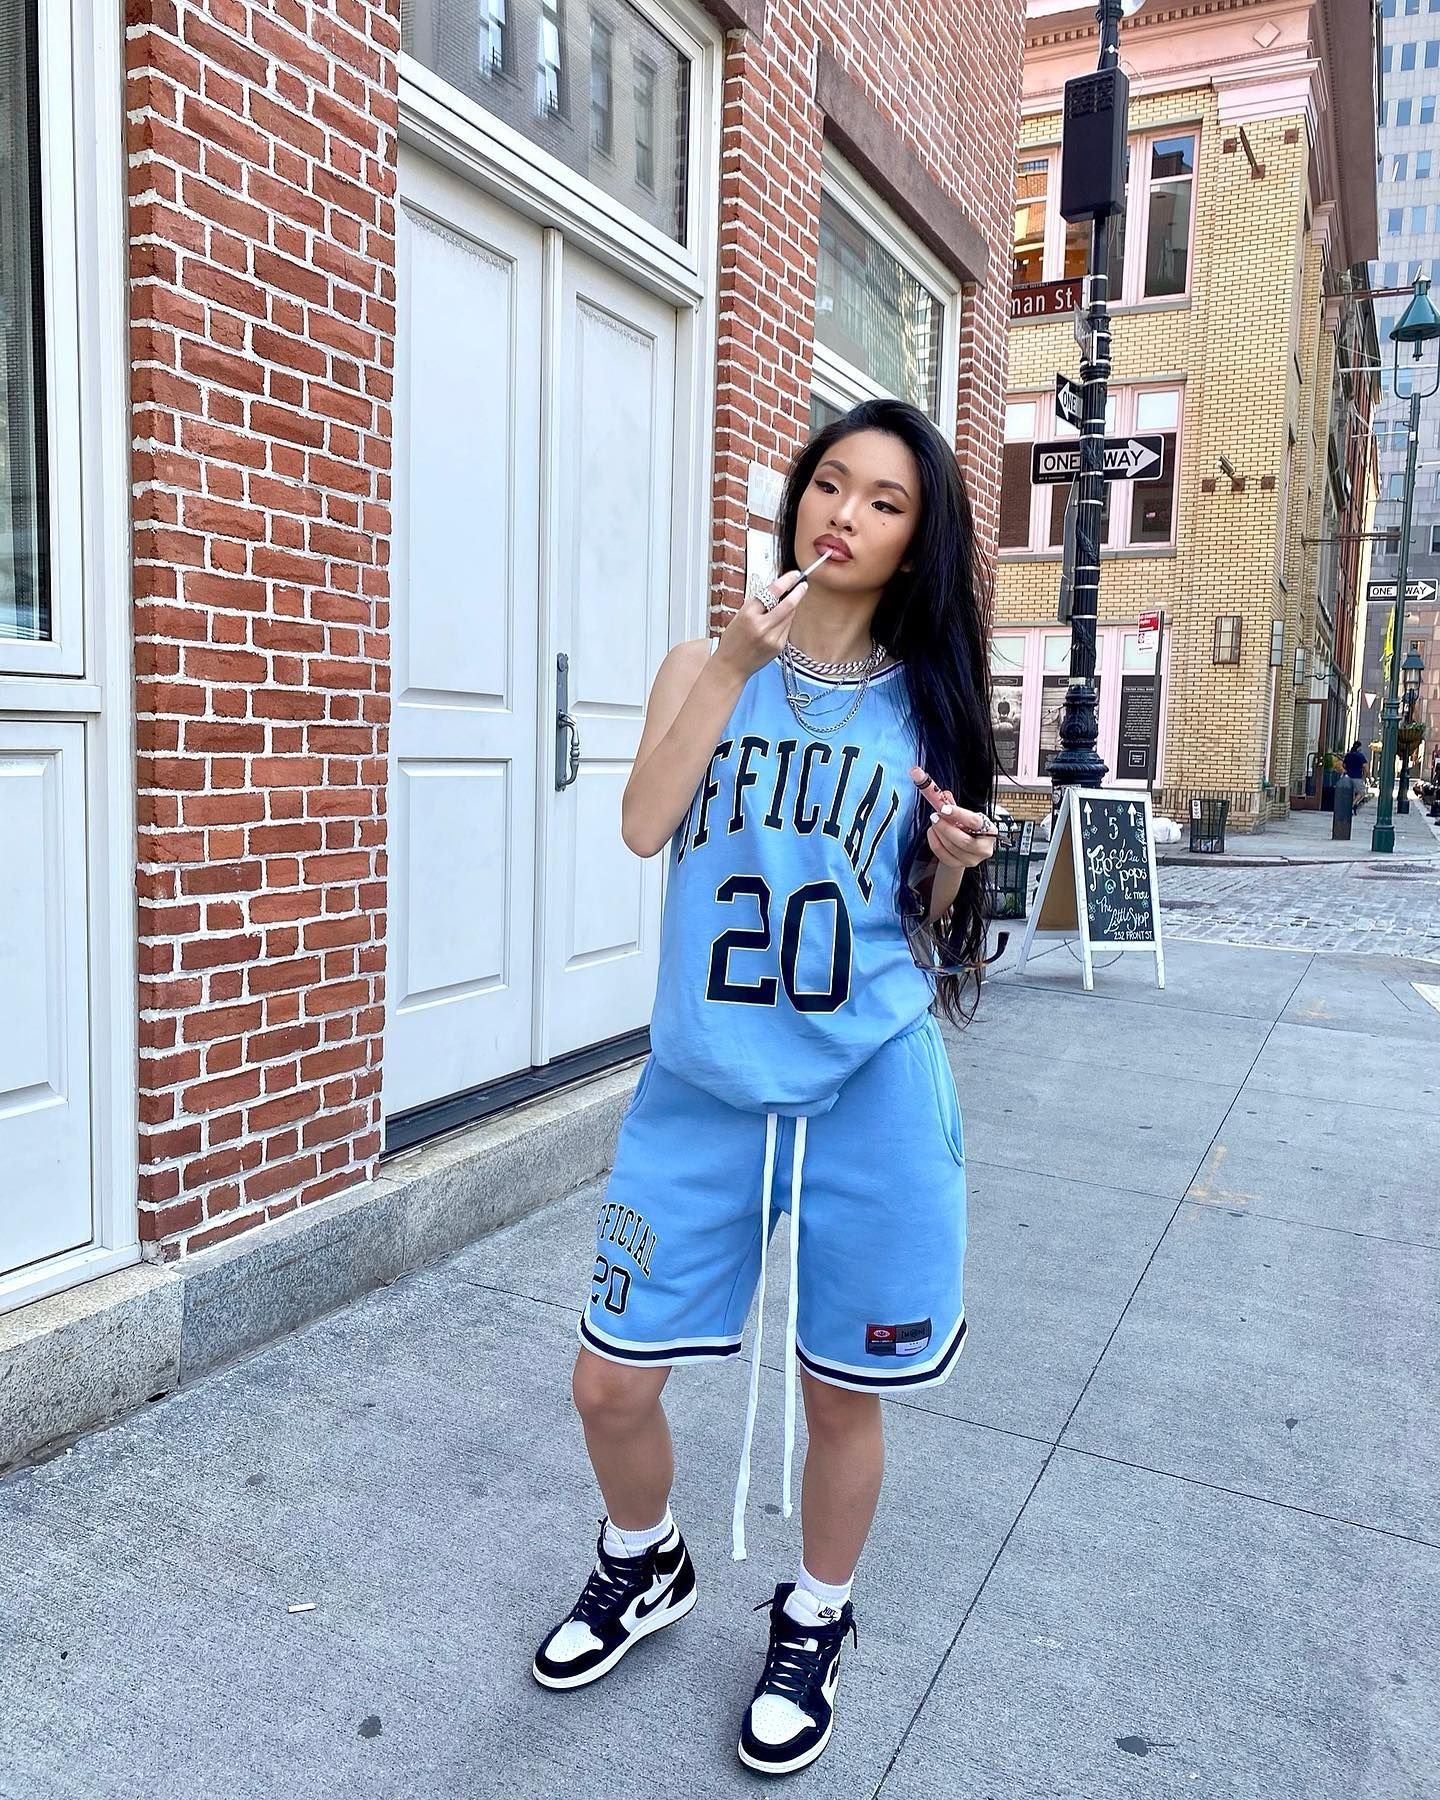 23 Sporty Casual Outfit Ideas To Wear To A Basketball Game! — Nikki Lo